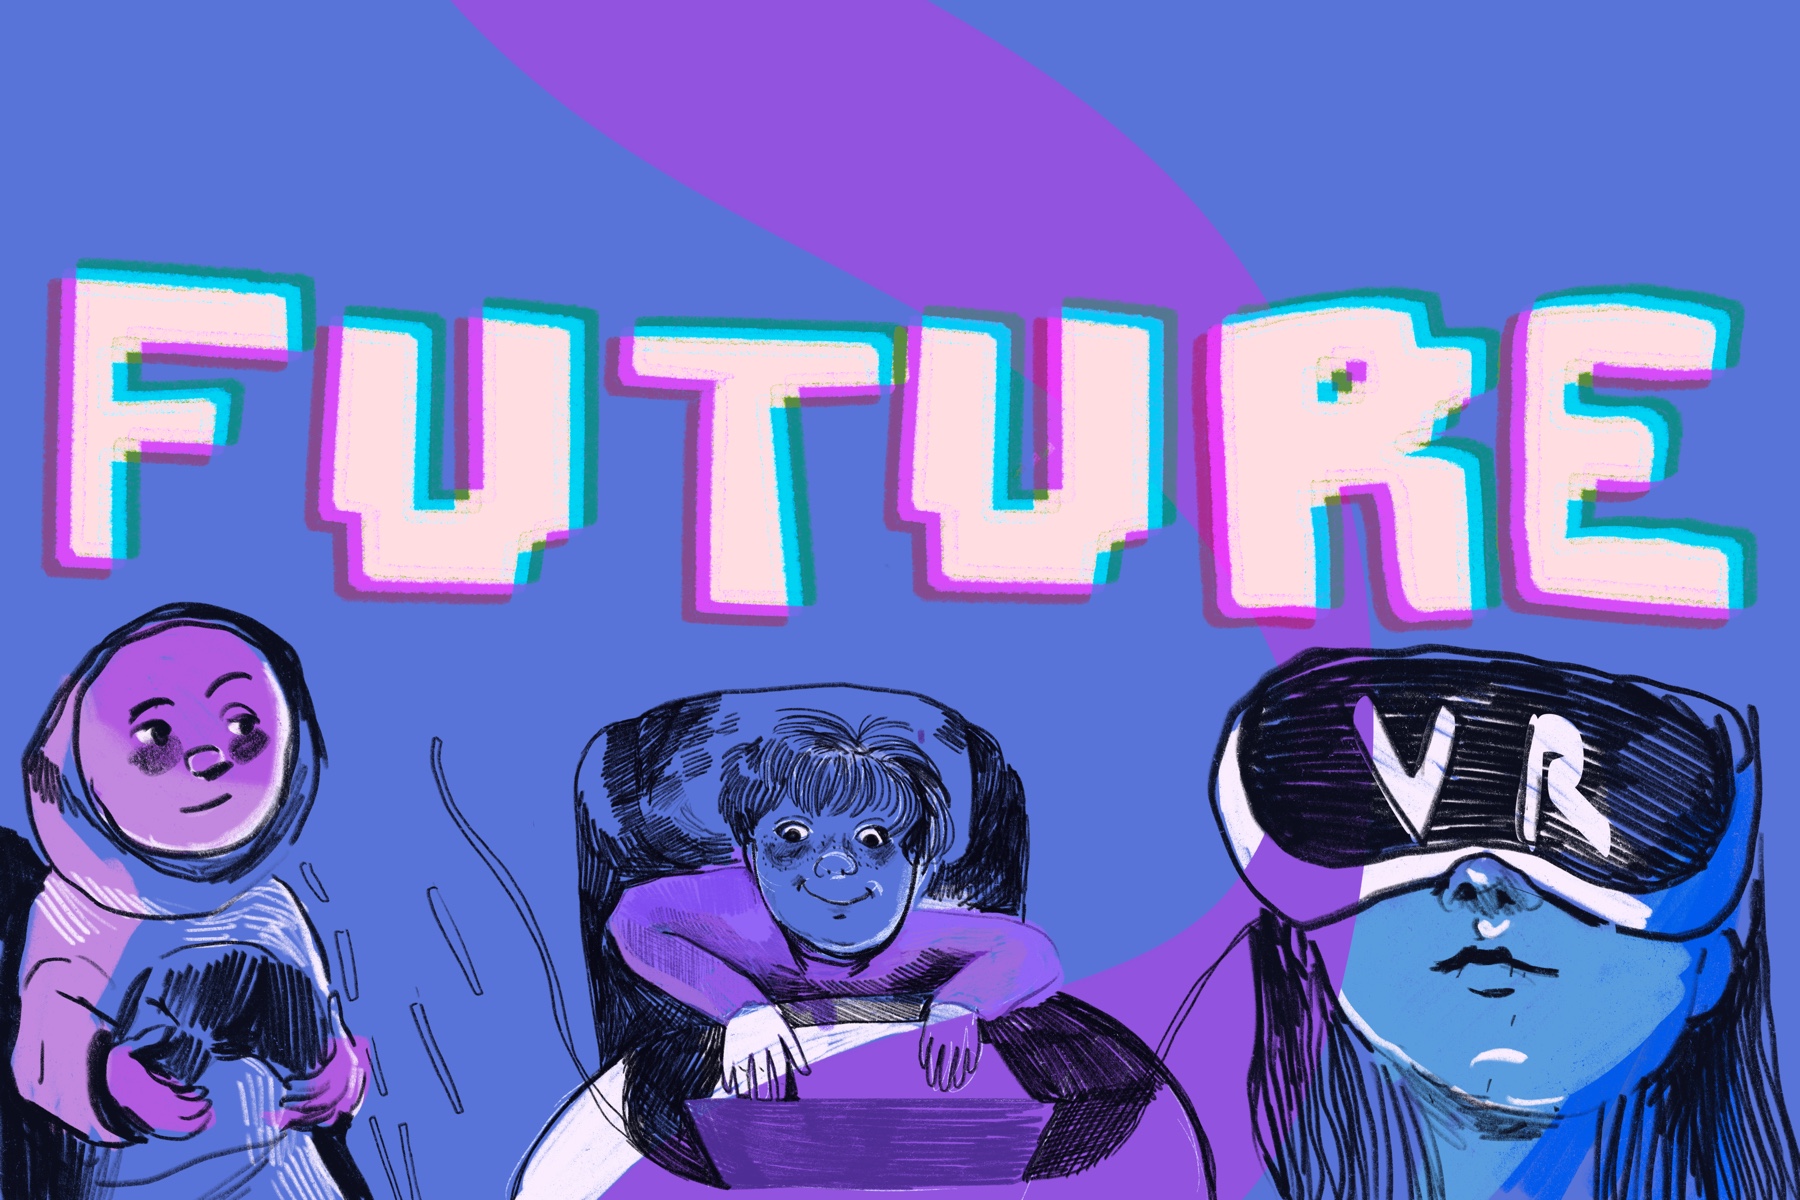 The word future in light pink with blue and purple accents over three people playing video games (one person holding a controller, one on laptop and one with VR headset). 